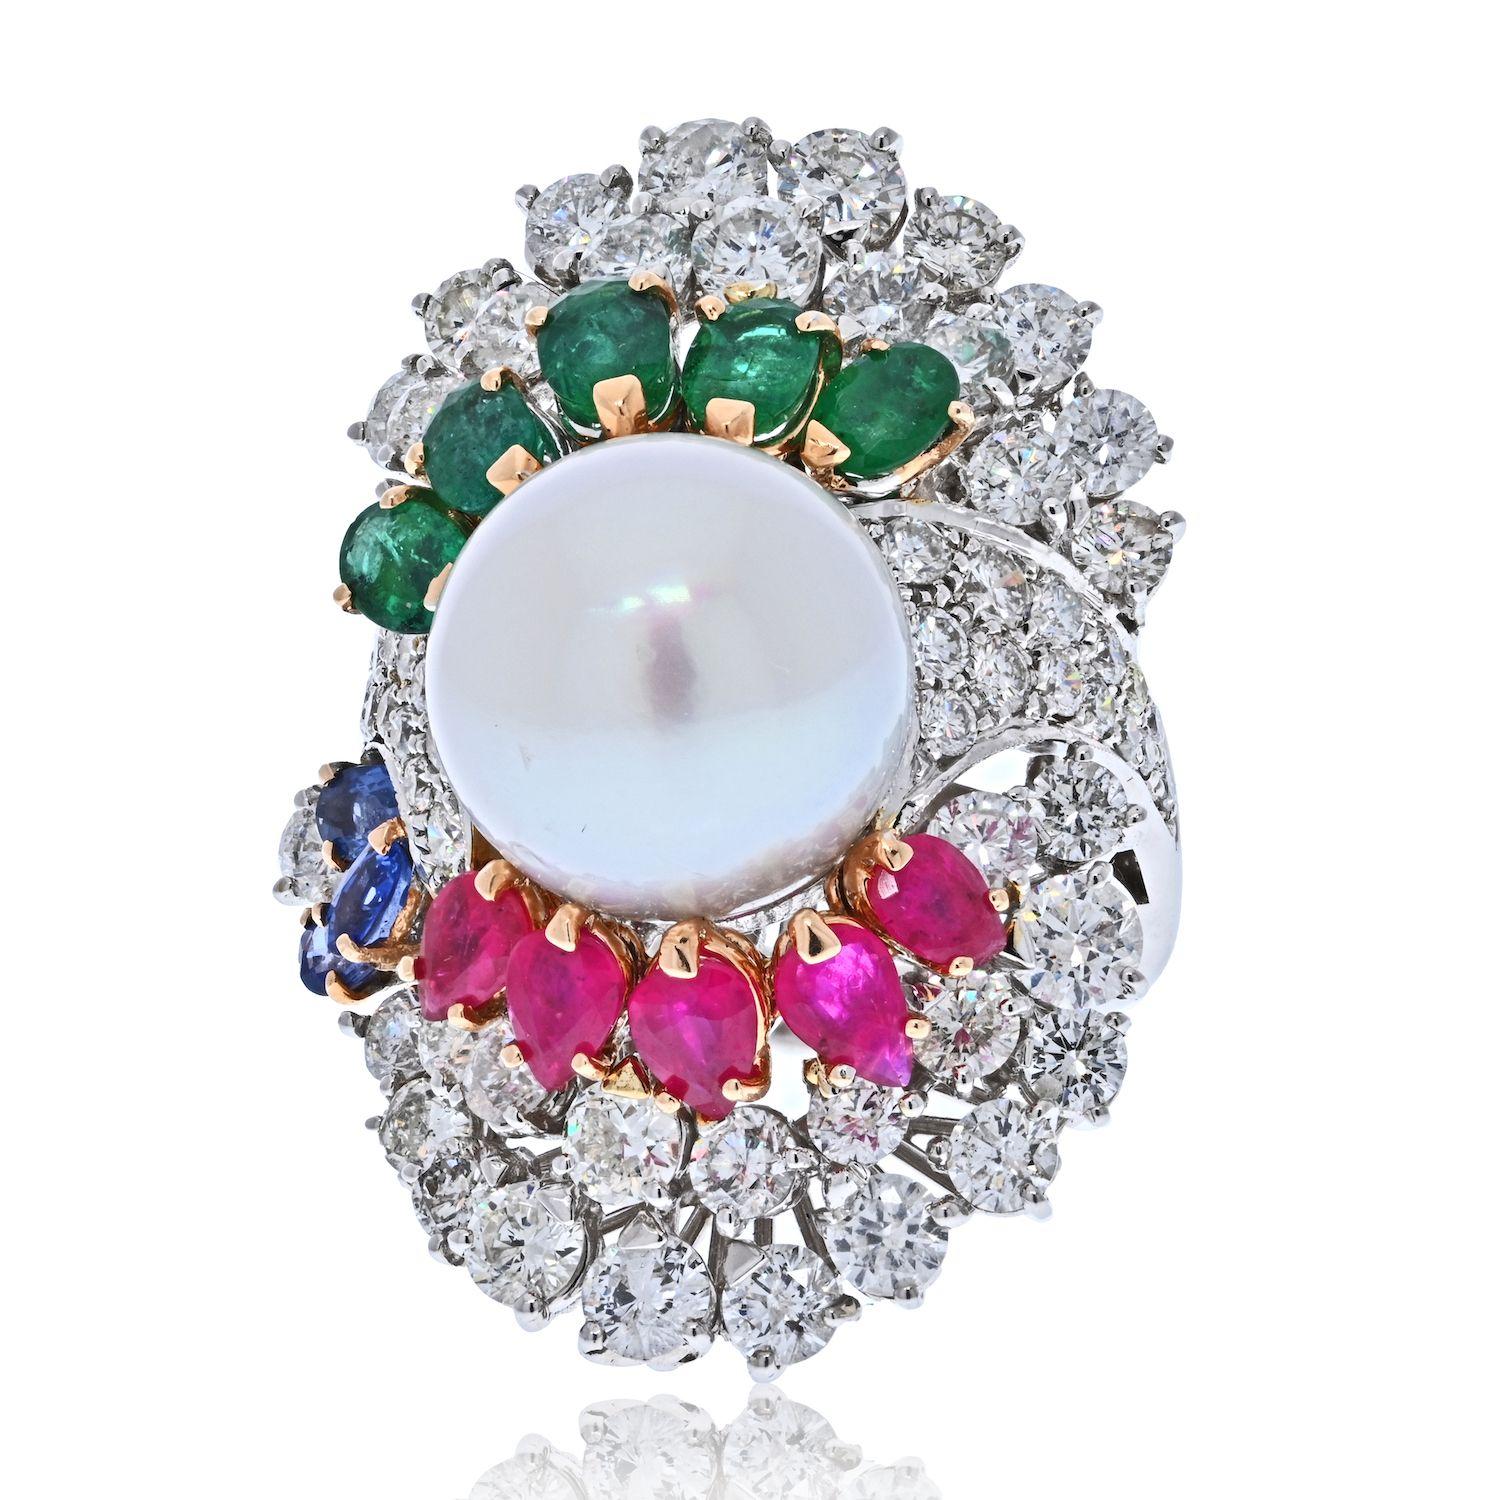 Modern 14K White Gold Diamond, Ruby, Emerald and South Sea Pearl Ring For Sale